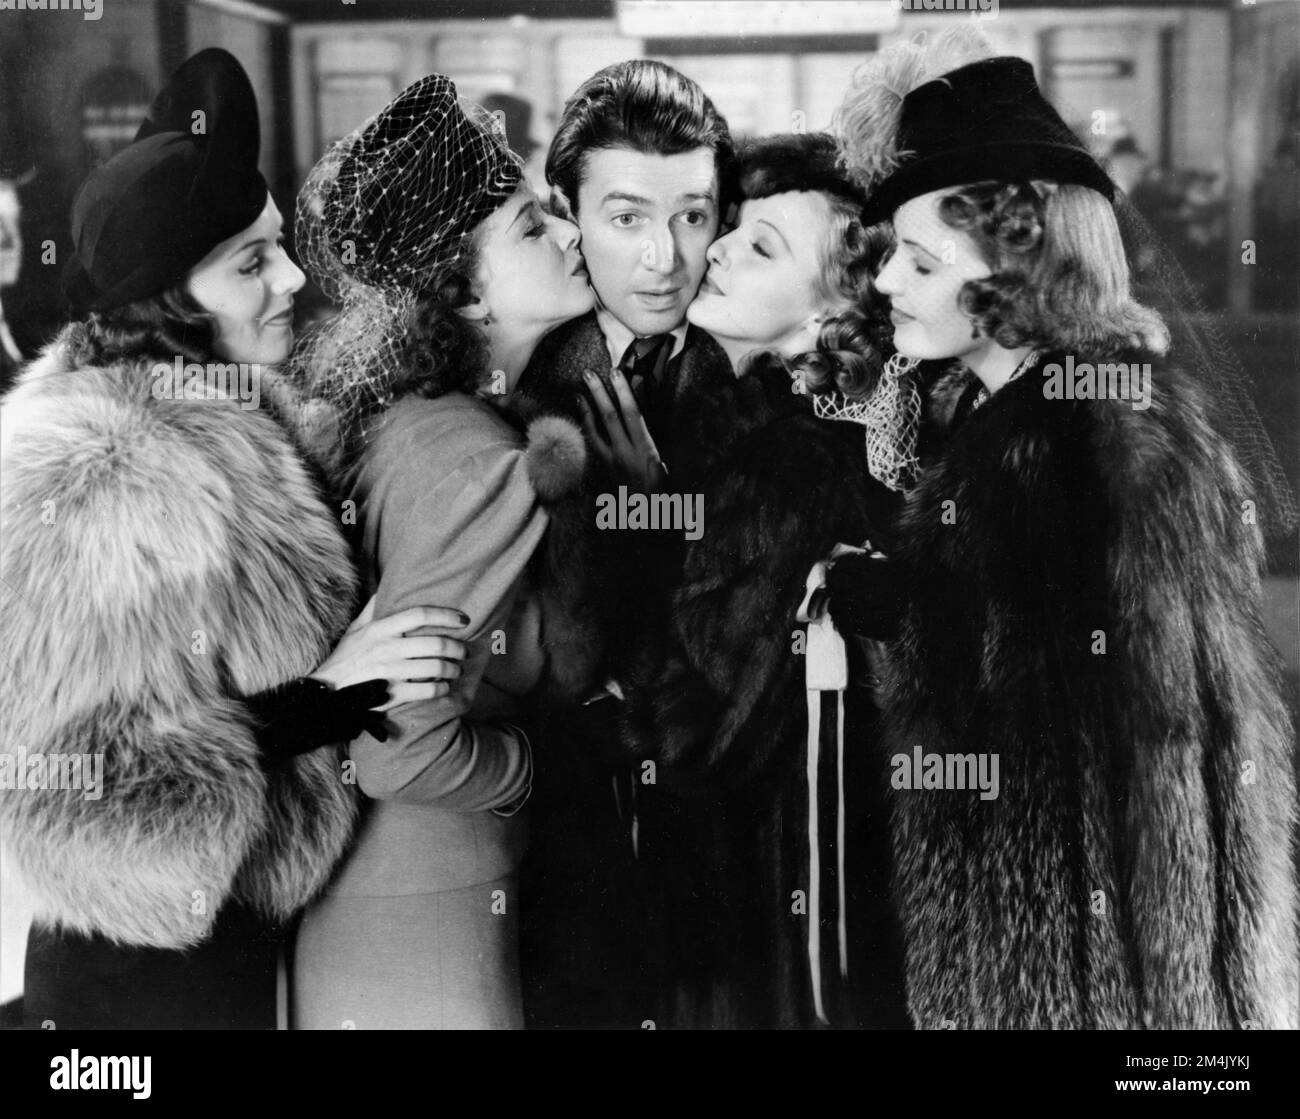 DOROTHY COMINGORE JAMES STEWART ASTRID ALLWYN and  FRANCES GIFFORD in MR. SMITH GOES TO WASHINGTON 1939 director FRANK CAPRA story Lewis R. Foster screenplay Sidney Buchman music Dimitri Tiomkin Columbia Pictures Stock Photo